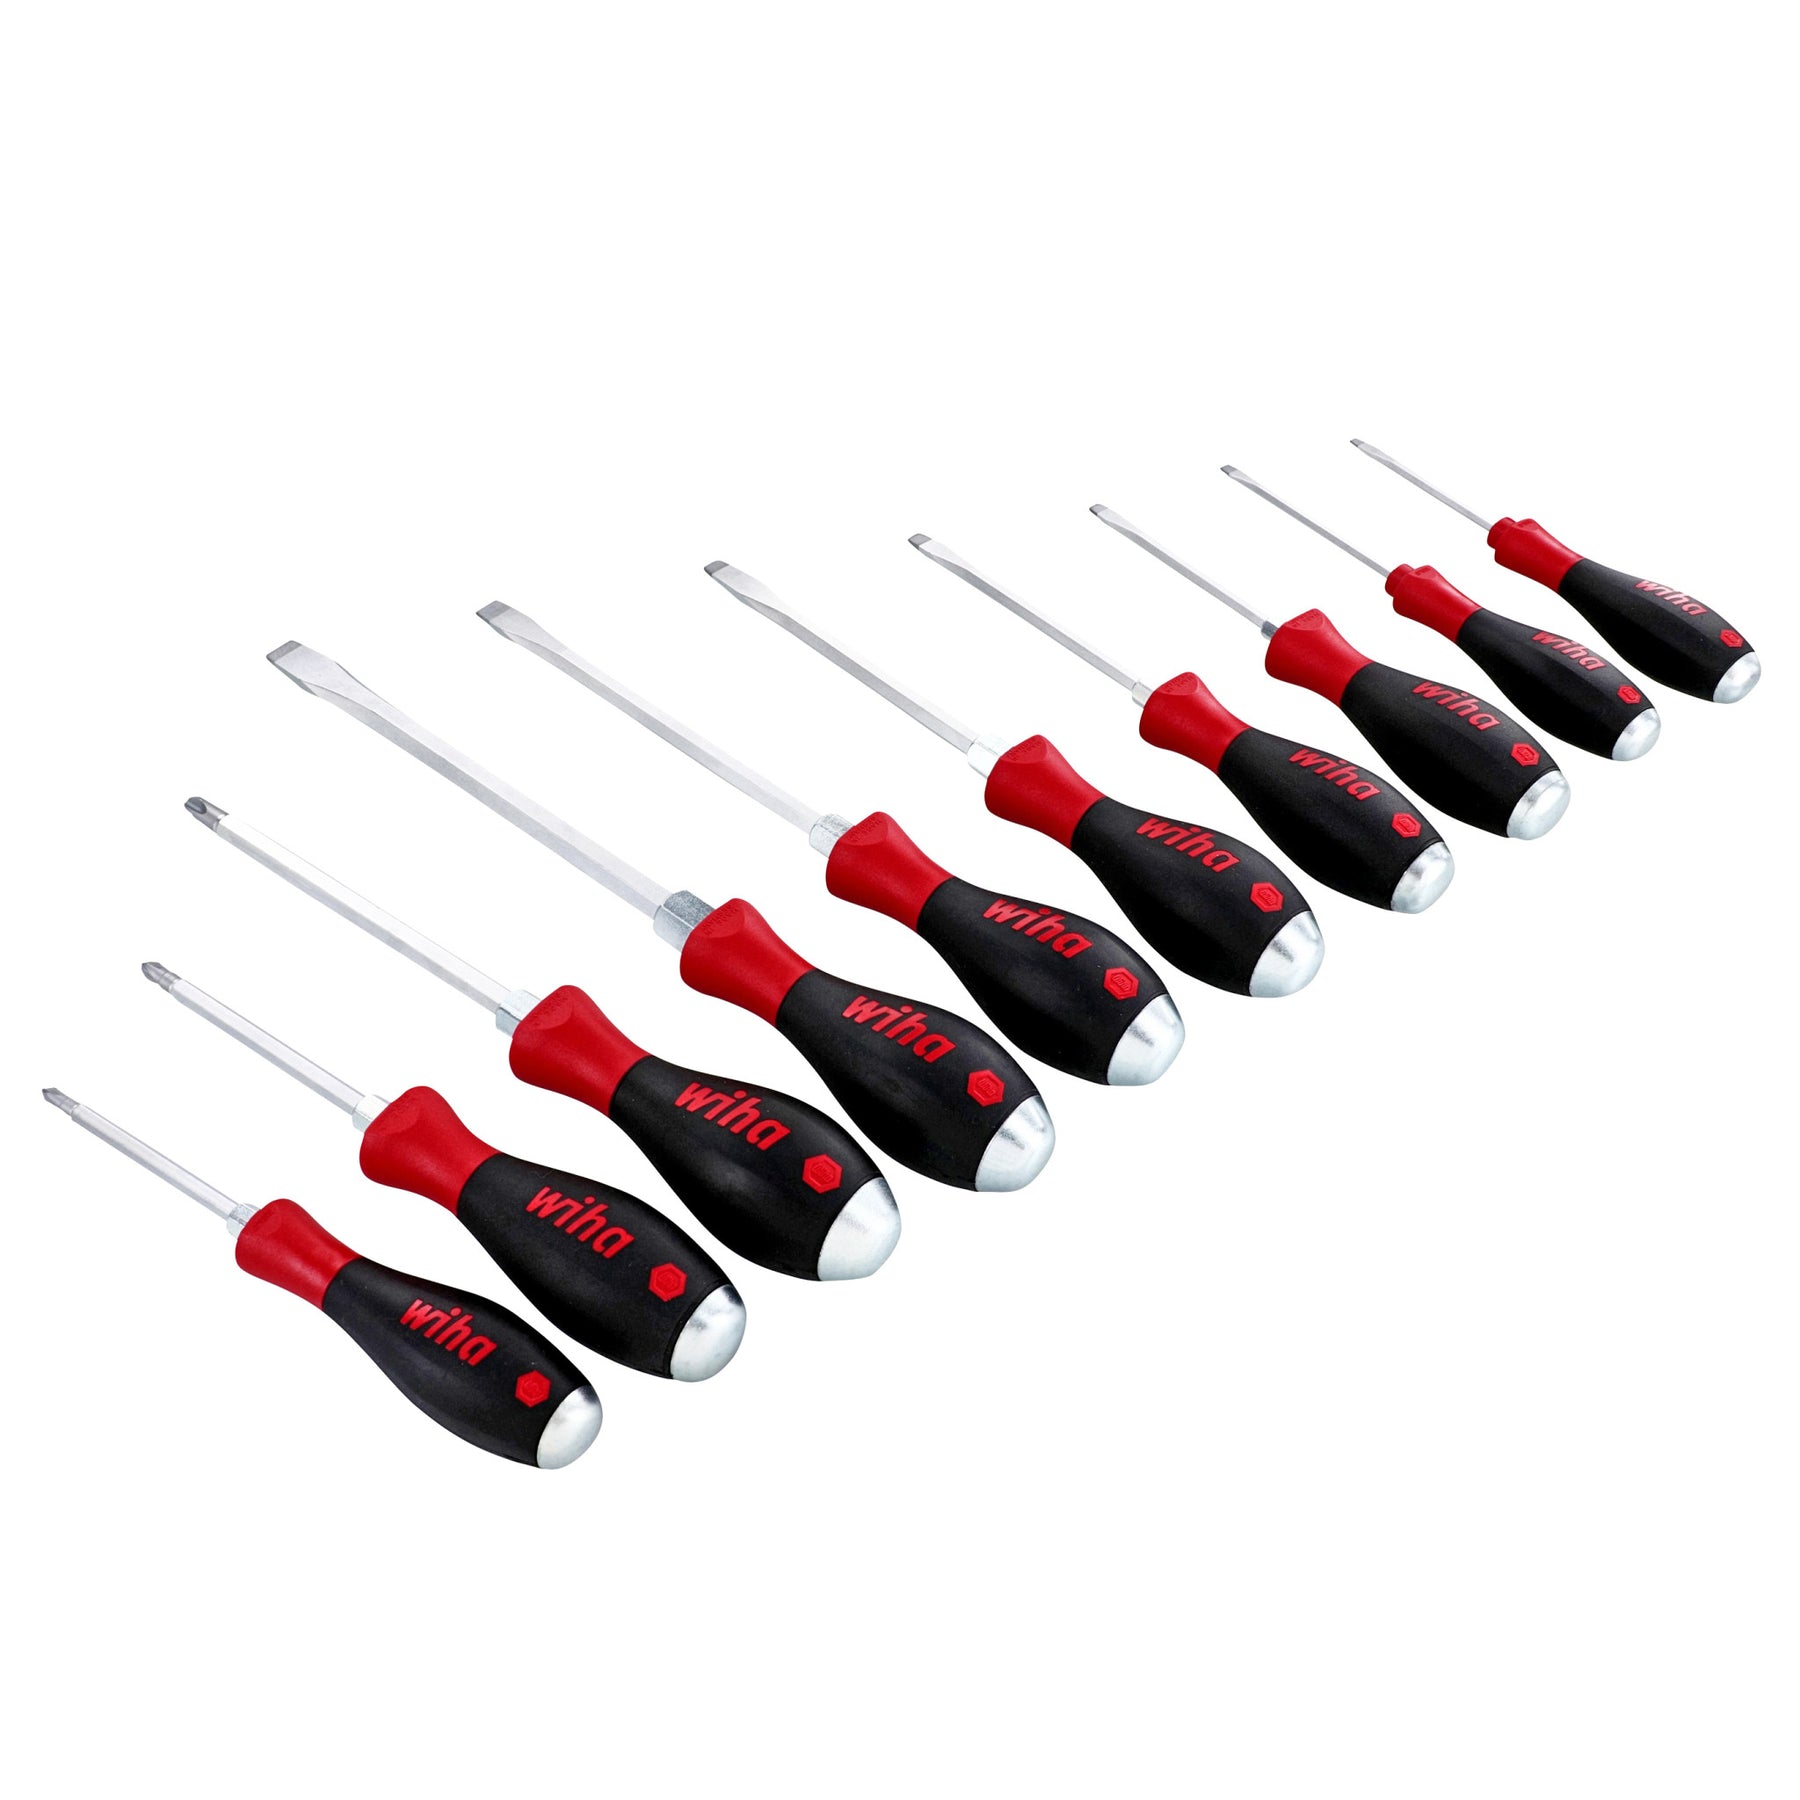 10 Piece SoftFinish X Heavy Duty Slotted and Phillips Screwdriver Set